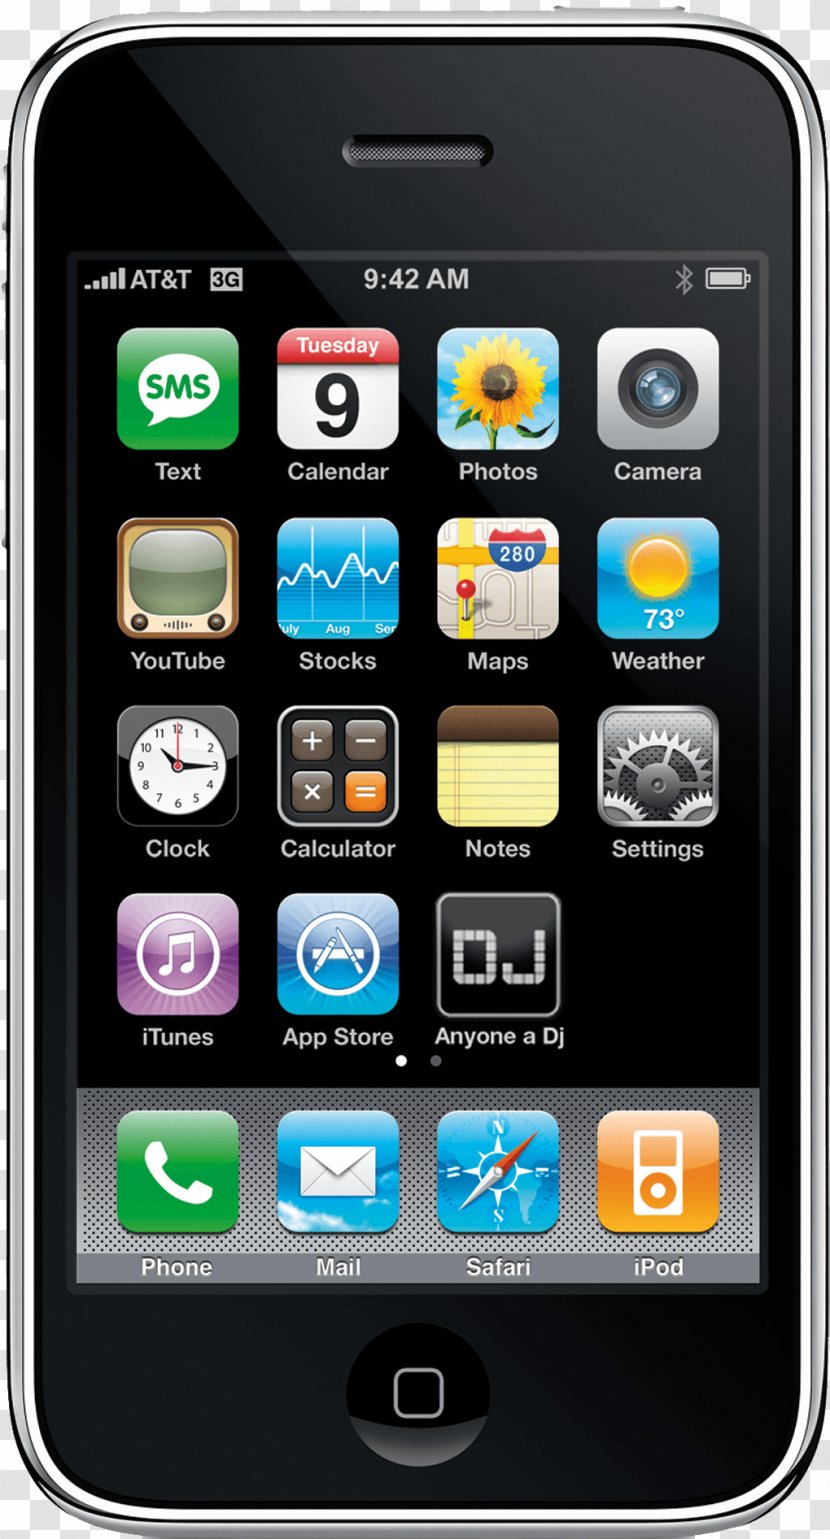 IPhone 3GS X 5s - Iphone 3gs - Apple Image Transparent PNG